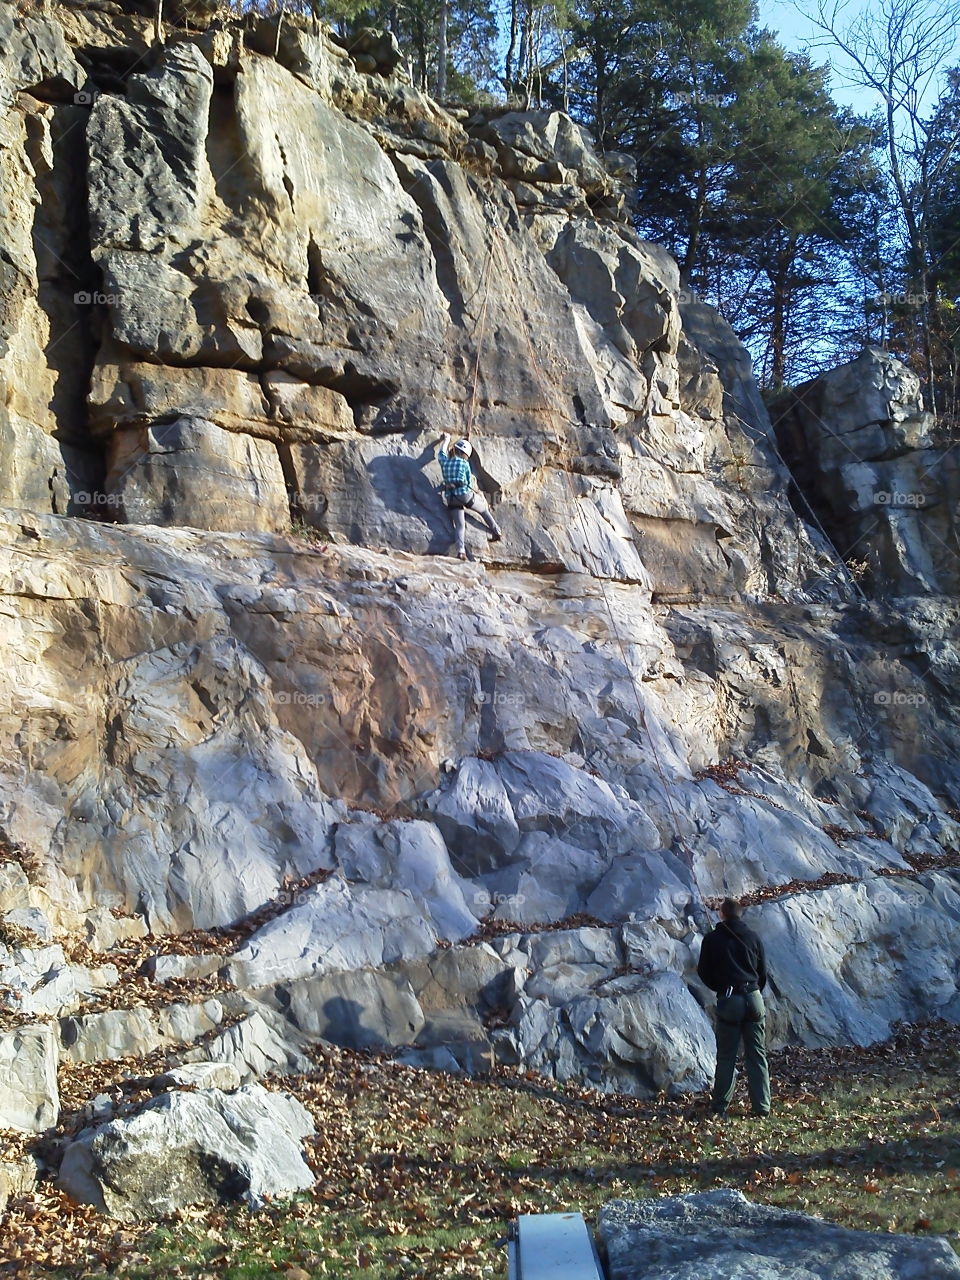 Rock Climbing in the Fall. Best weather for climbing. 